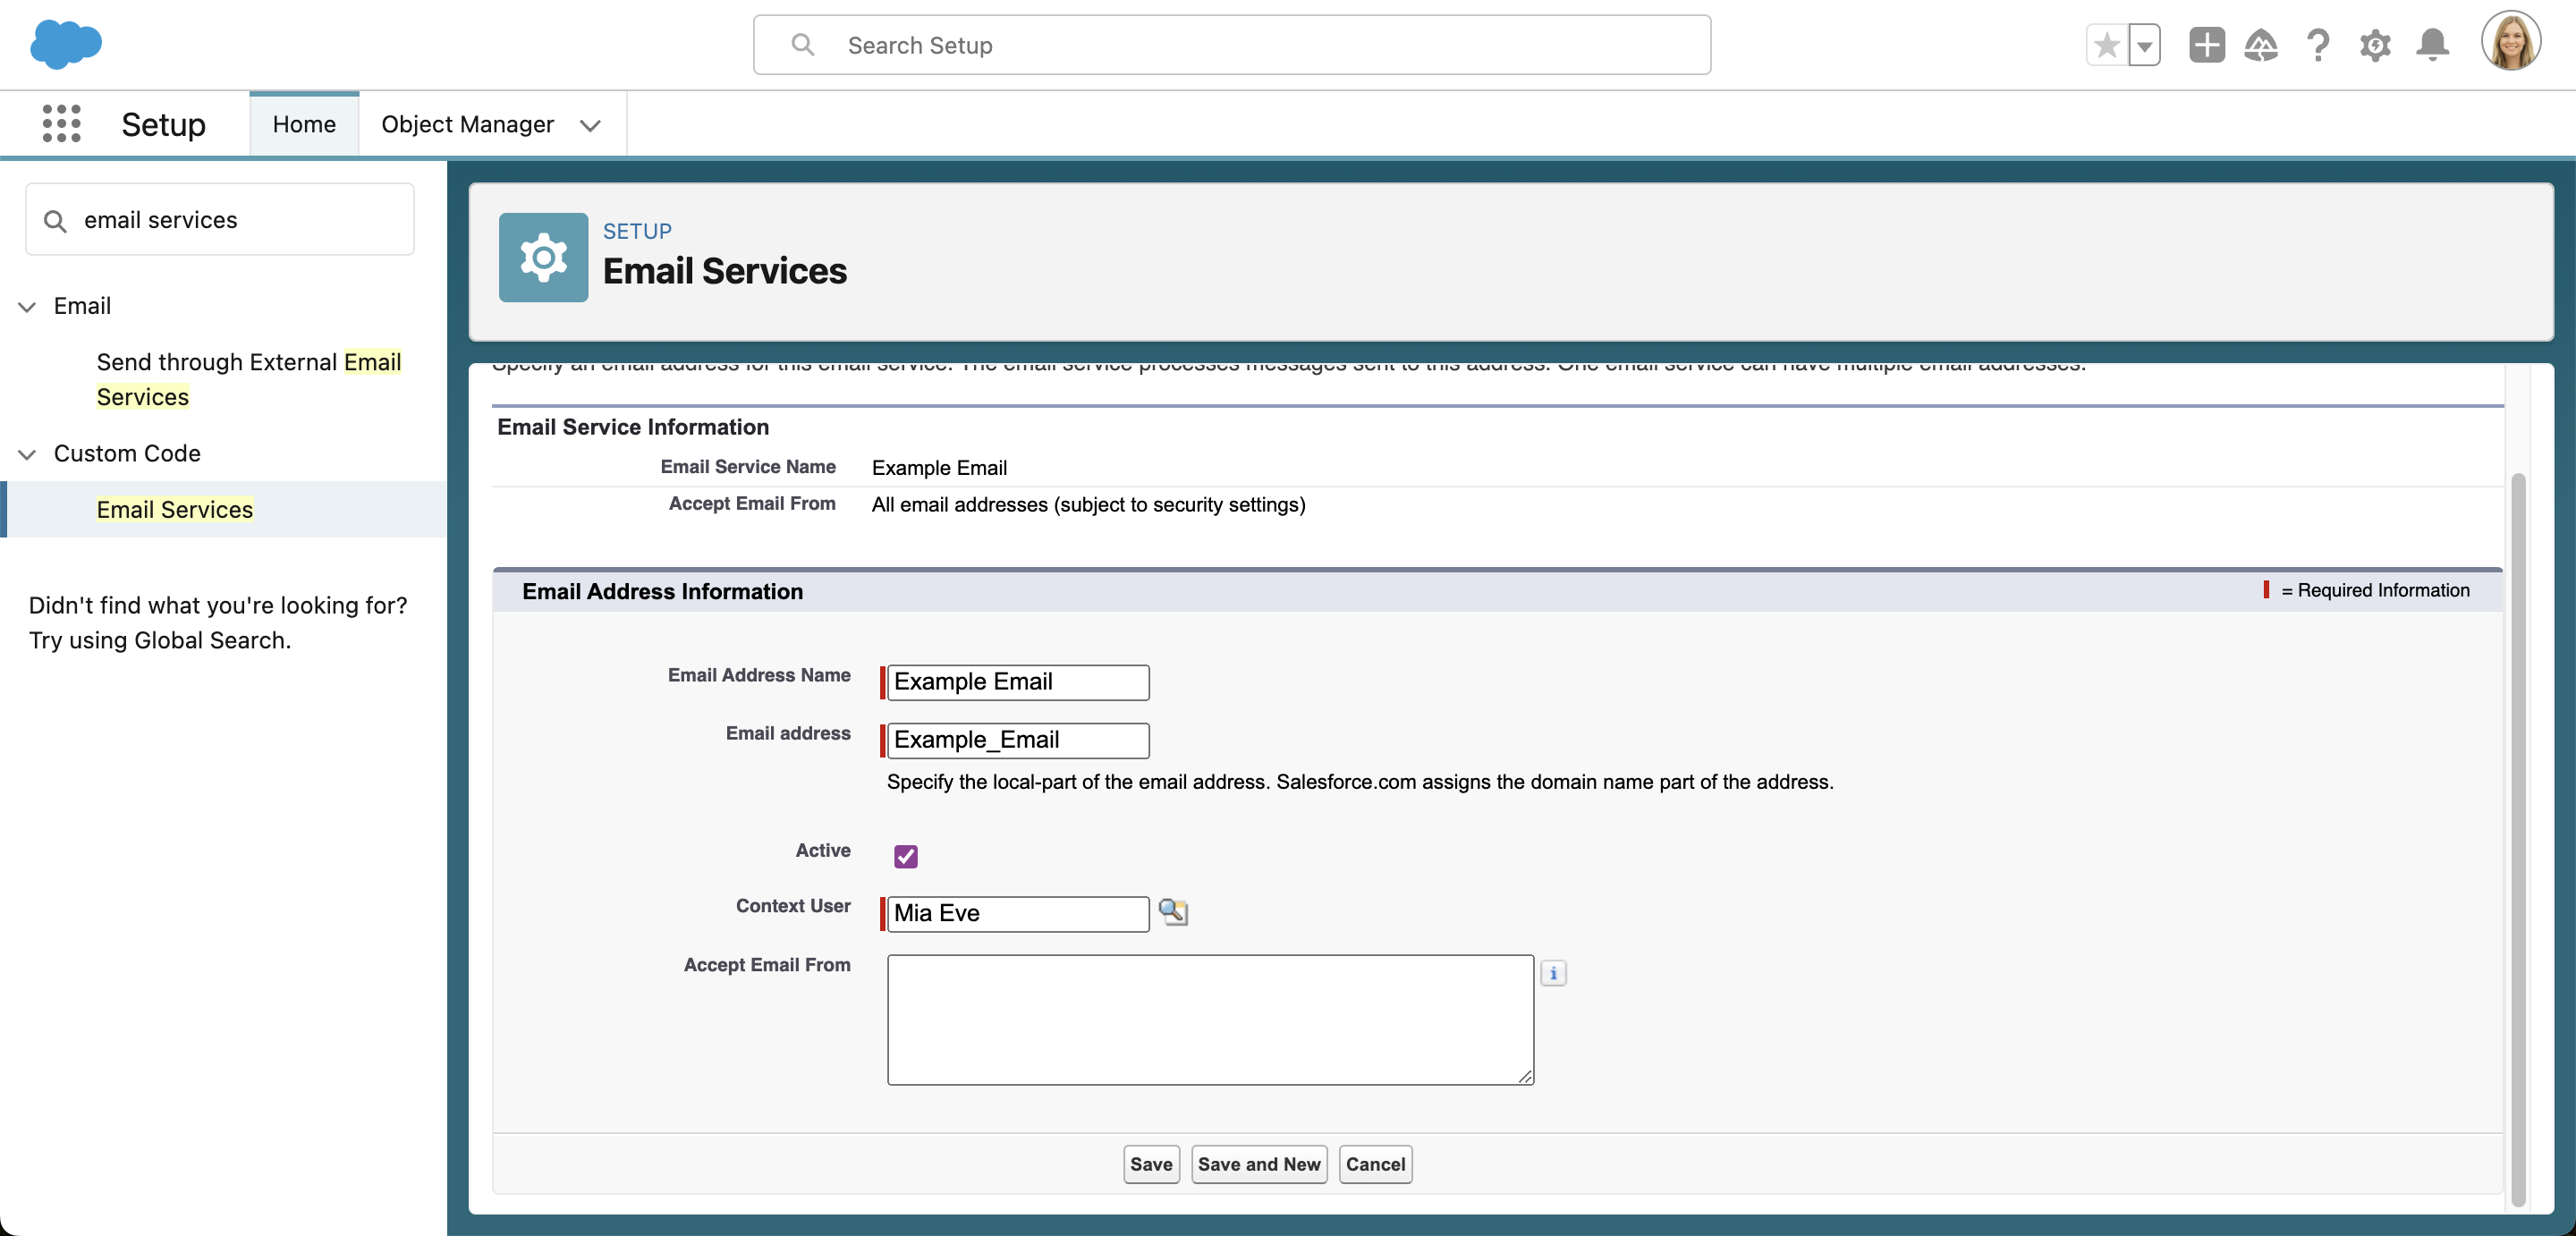 Setting up an email service in Salesforce Setup